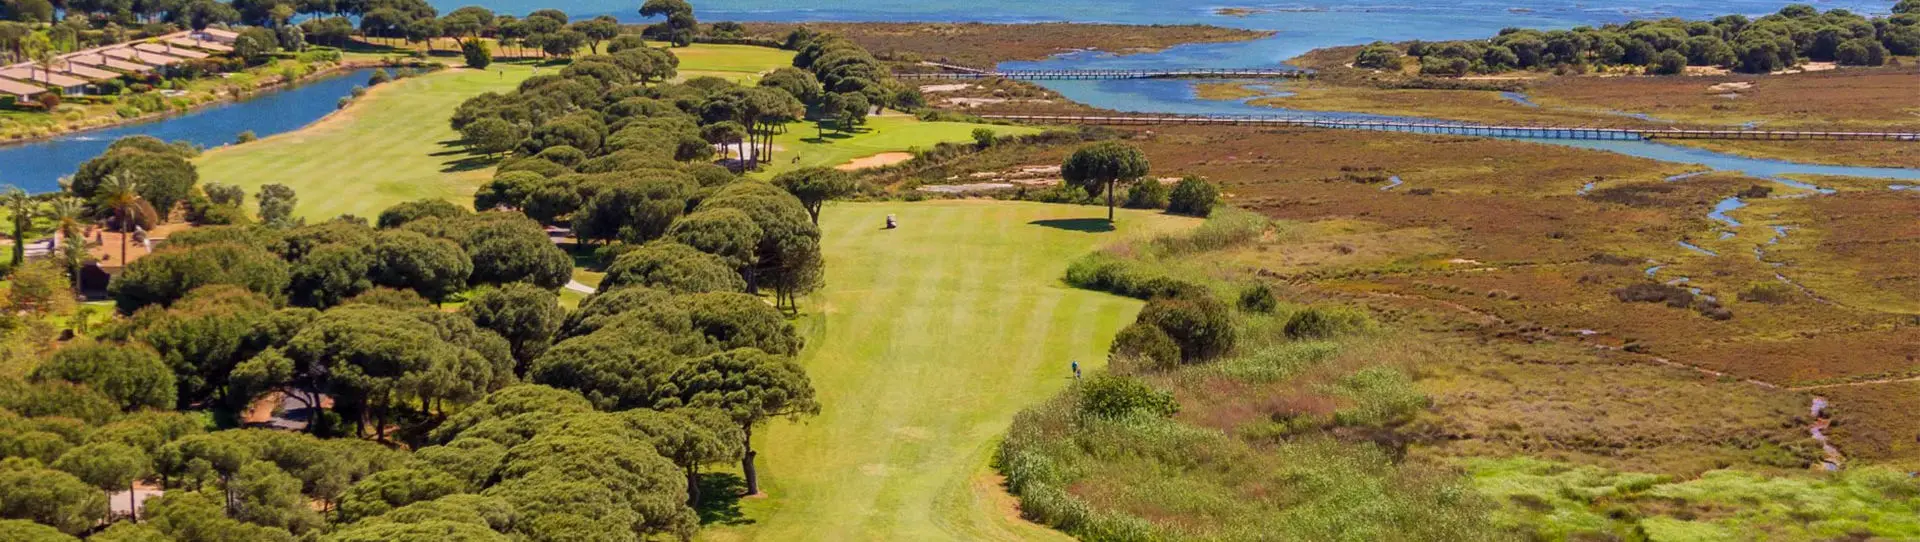 Spain golf holidays - El Rompido Two Rounds Package - Photo 1